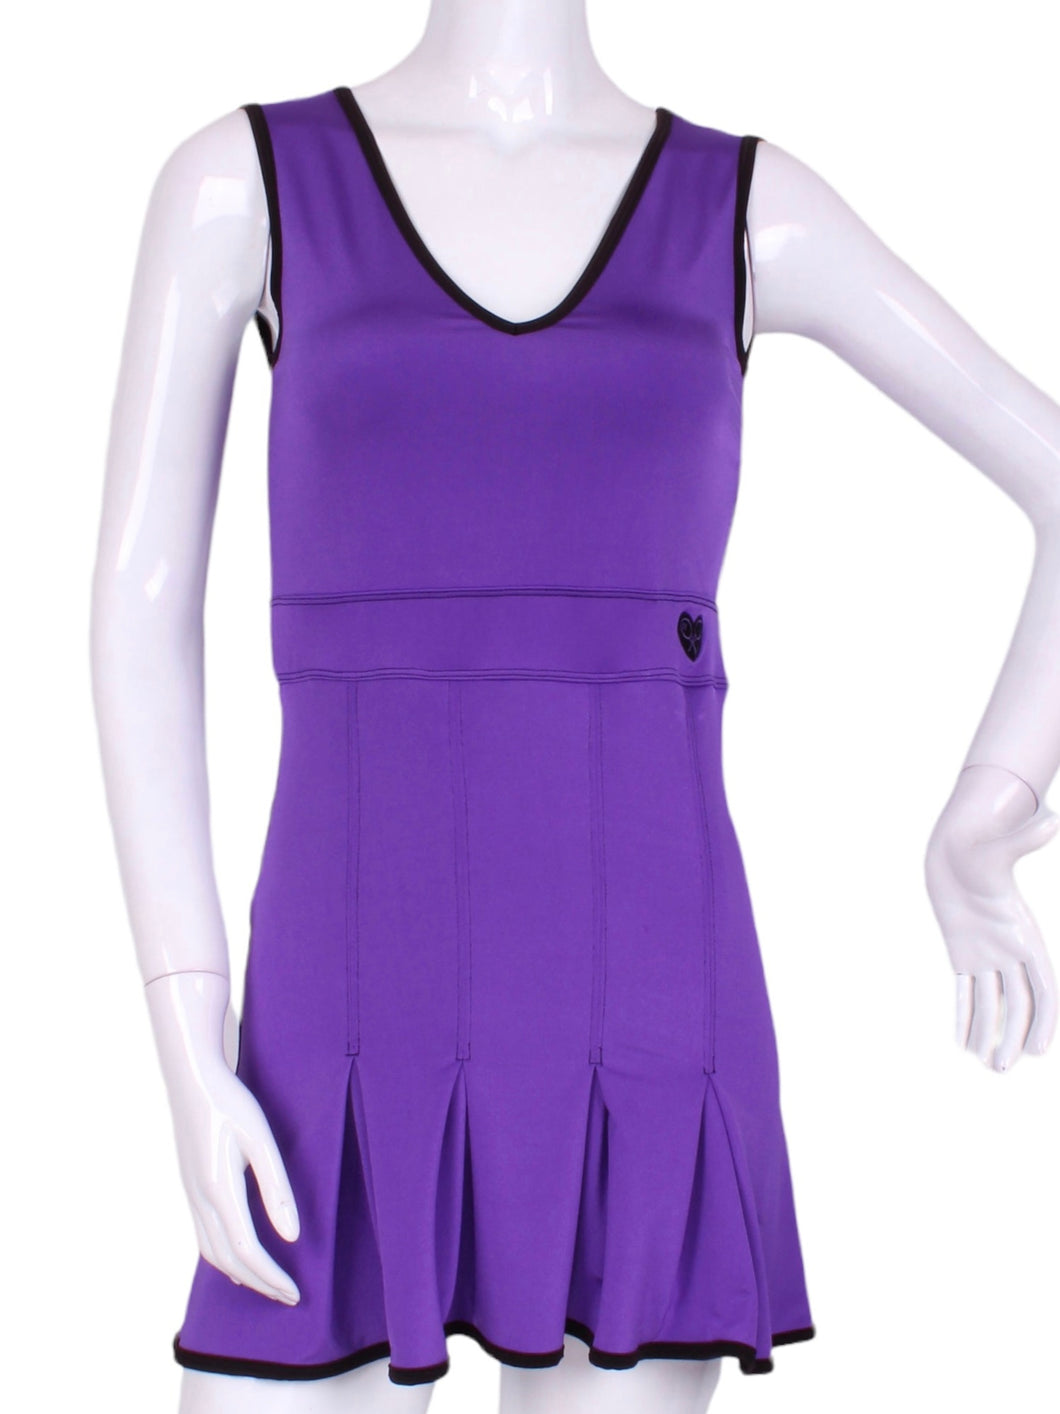 The Angelina Dress is from our sophisticated and elegant collections, for women with a flair for looking good.   Wear this stunning piece straight from the court....to cocktails.  This style is in our purple design, with a flattering v-neck neckline.